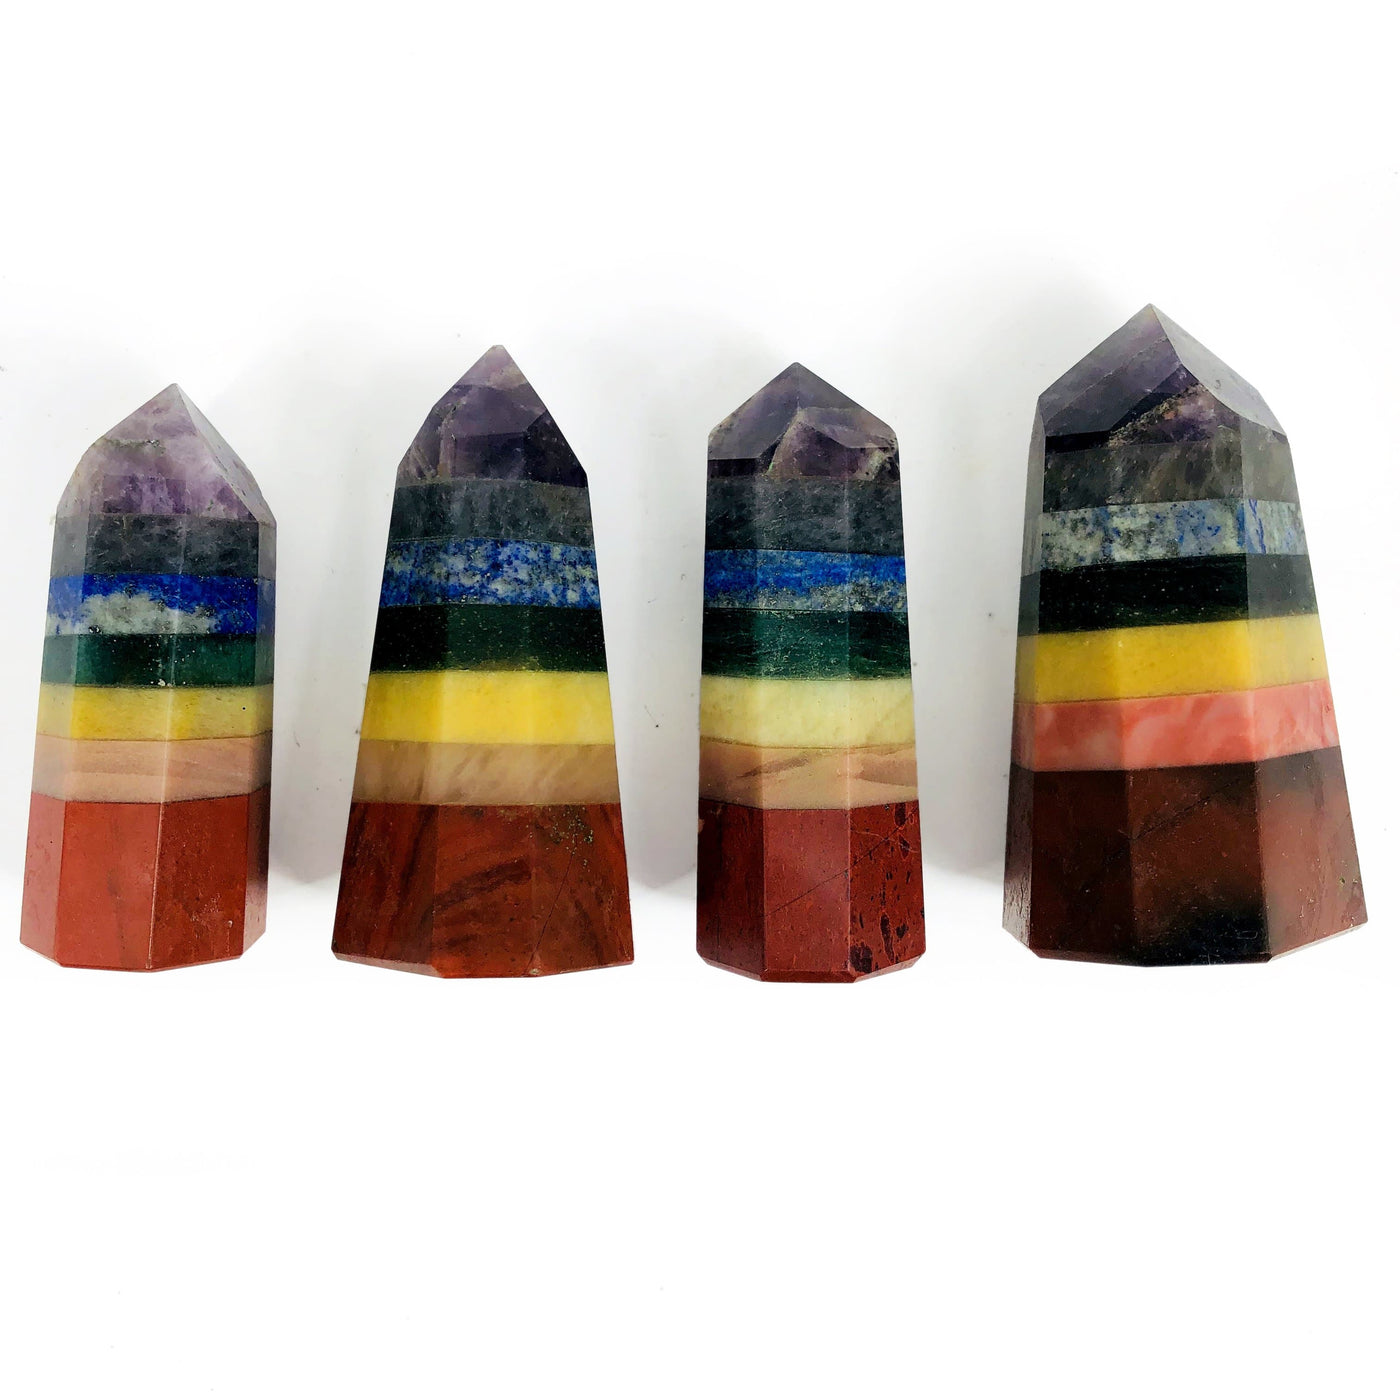 four seven chakra towers on display for possible variations